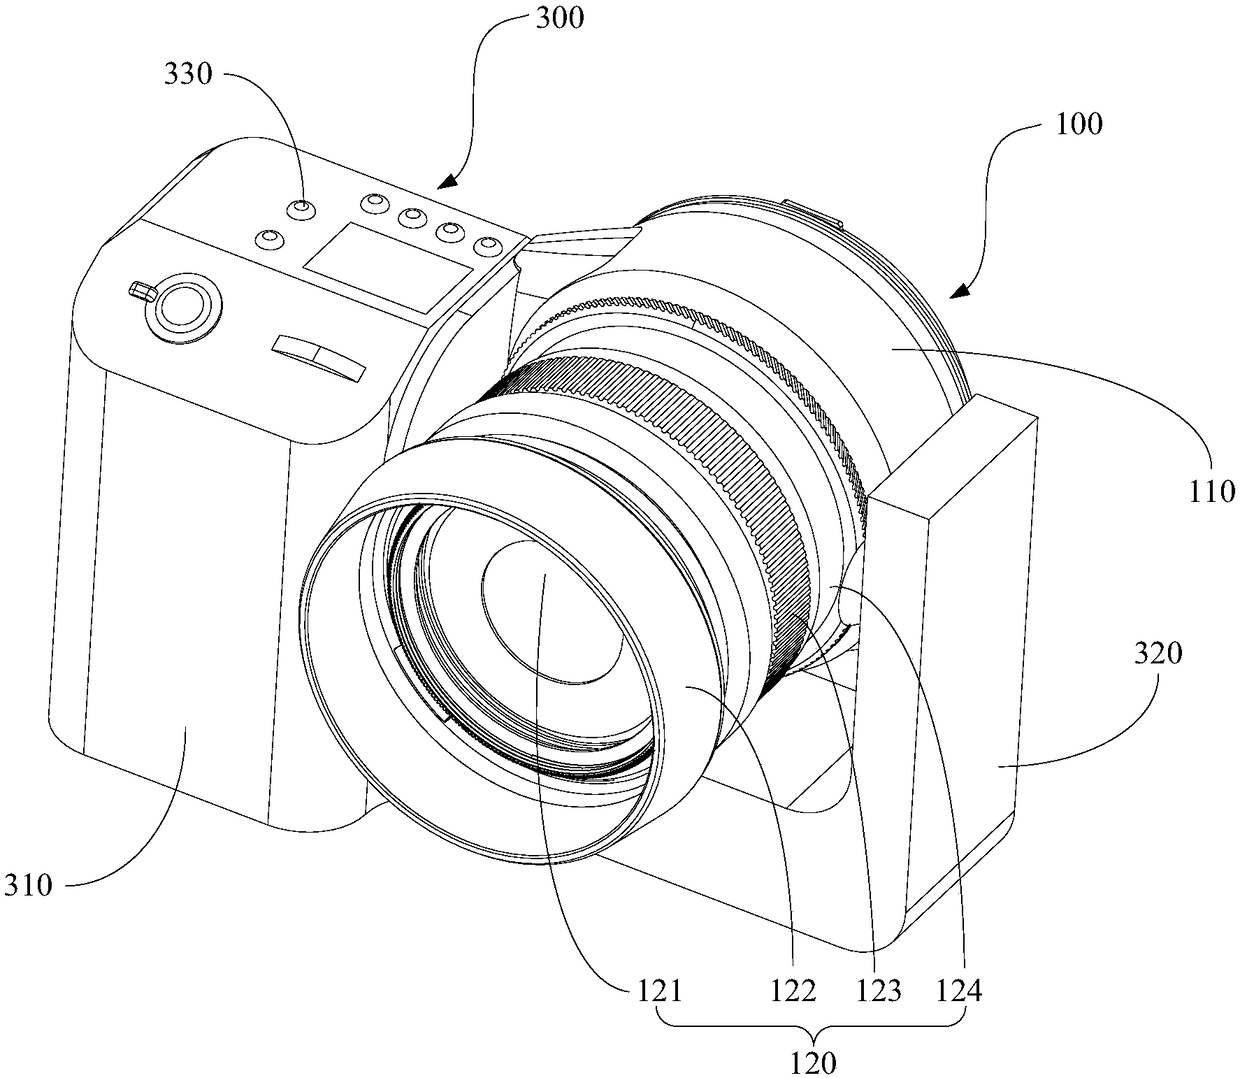 Imaging device, cradle head and camera body